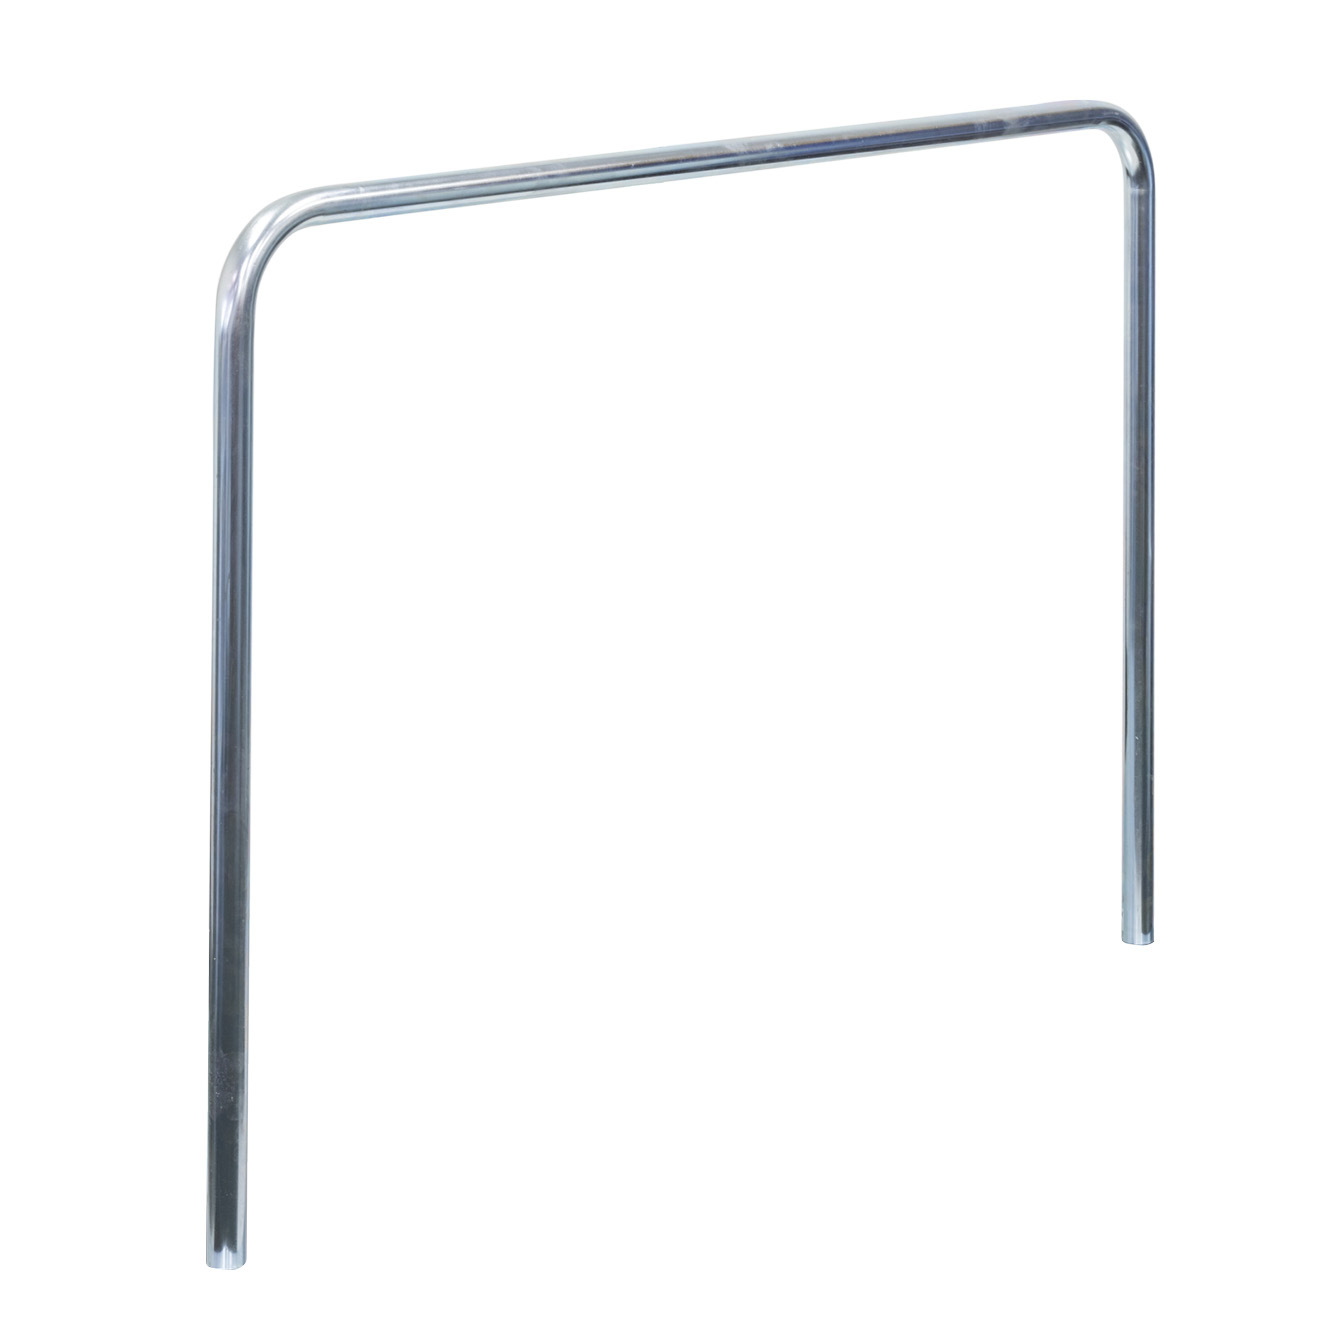 High Load Bar to suit